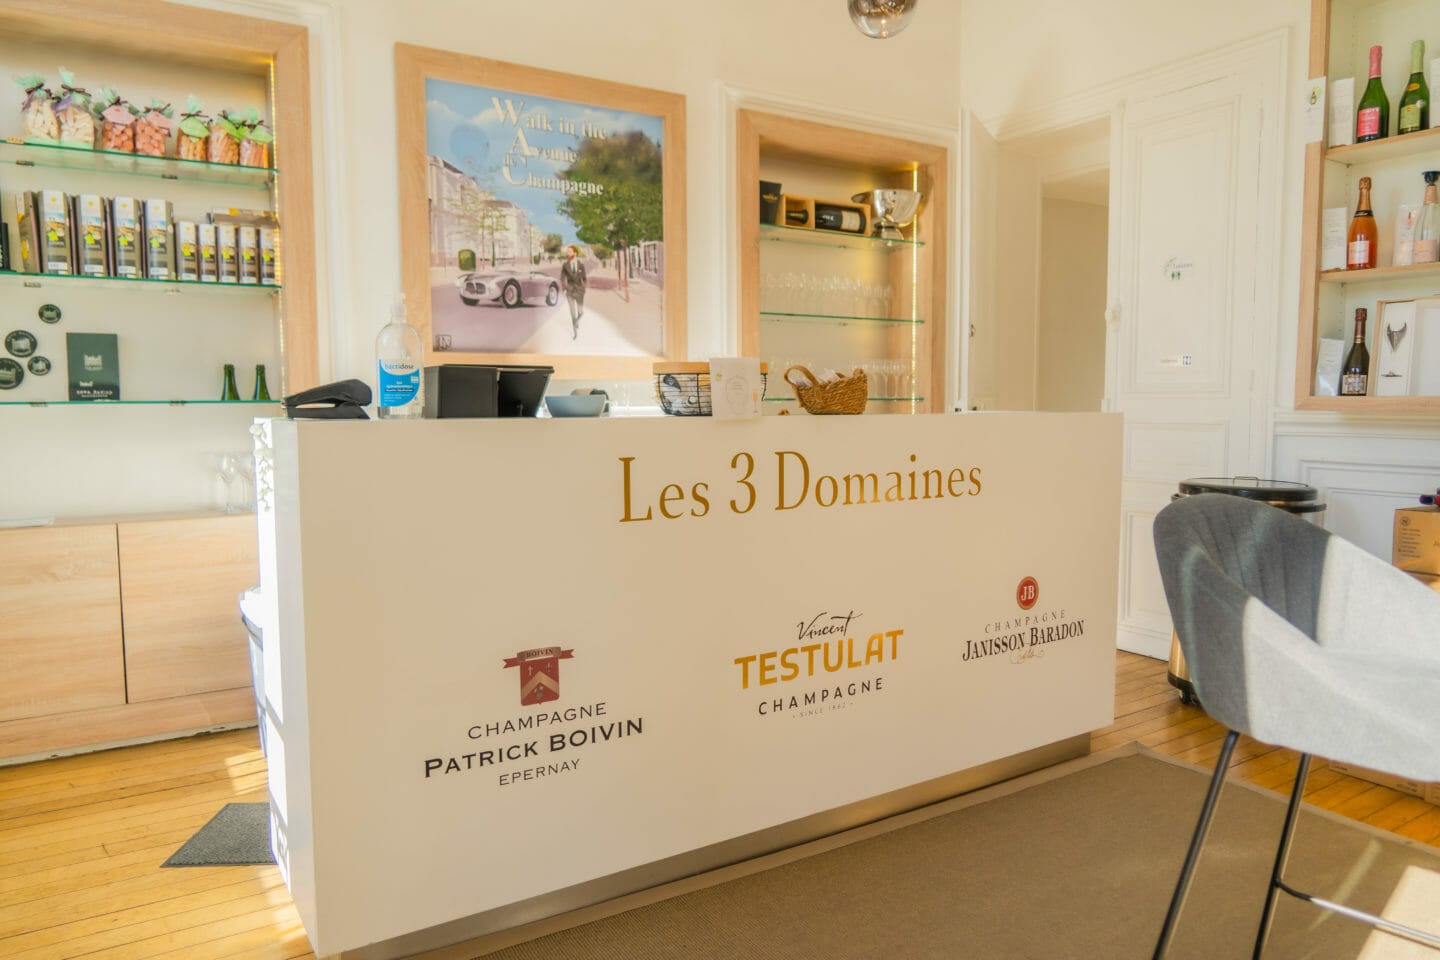 Les 3 Domaines - Epernay - Avenue de Champagne - Tasting - winemaker